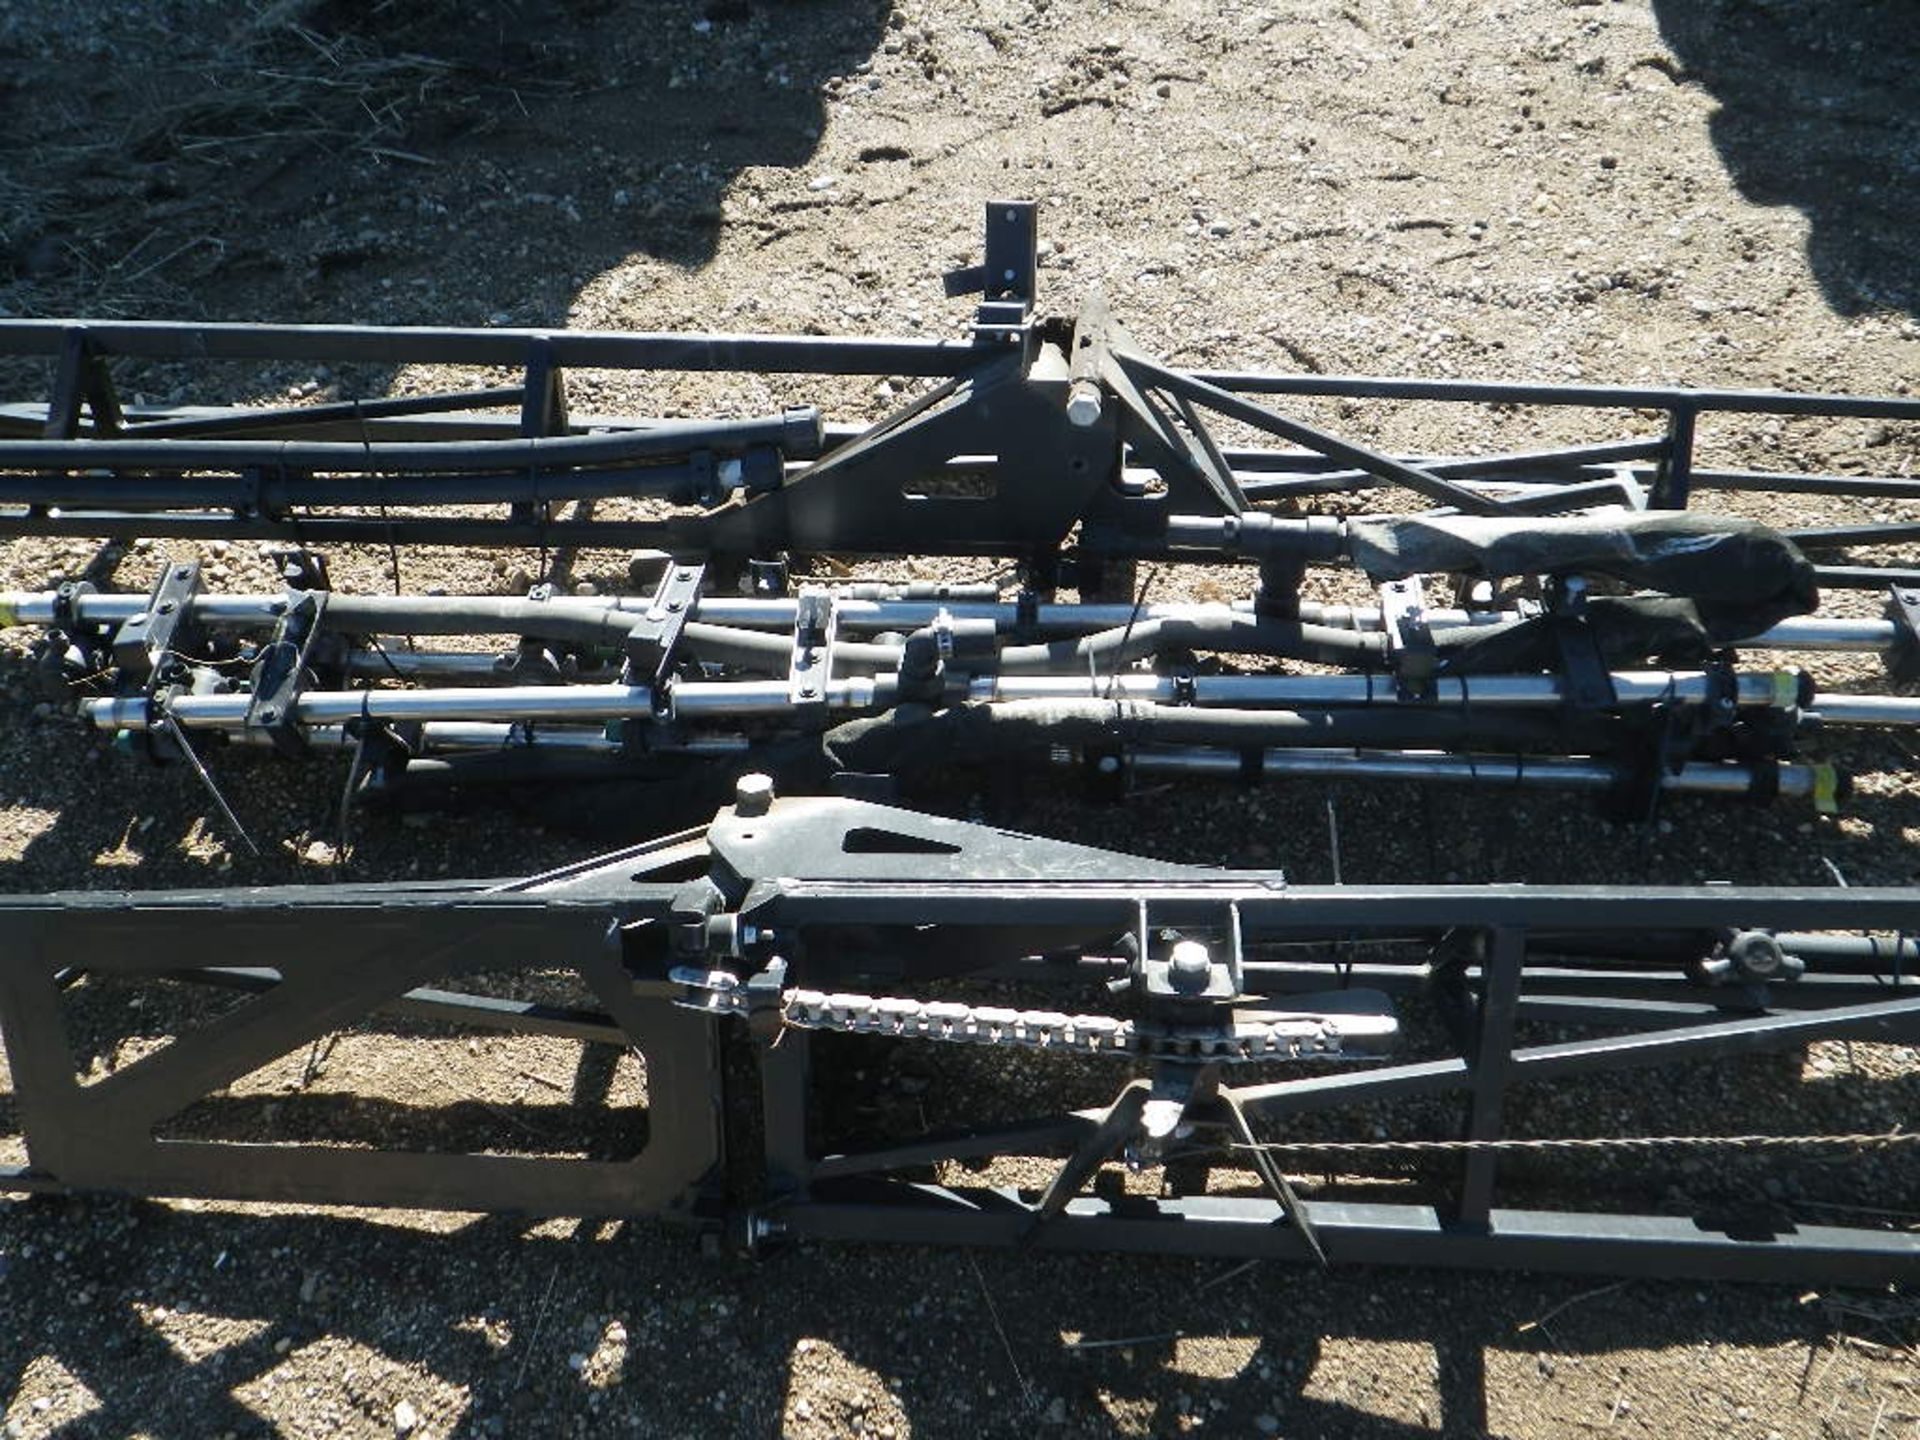 (36) 1 PAIR USED 100' BOOM WING TIPS FOR JD 4830 SPRAYER - Image 2 of 3